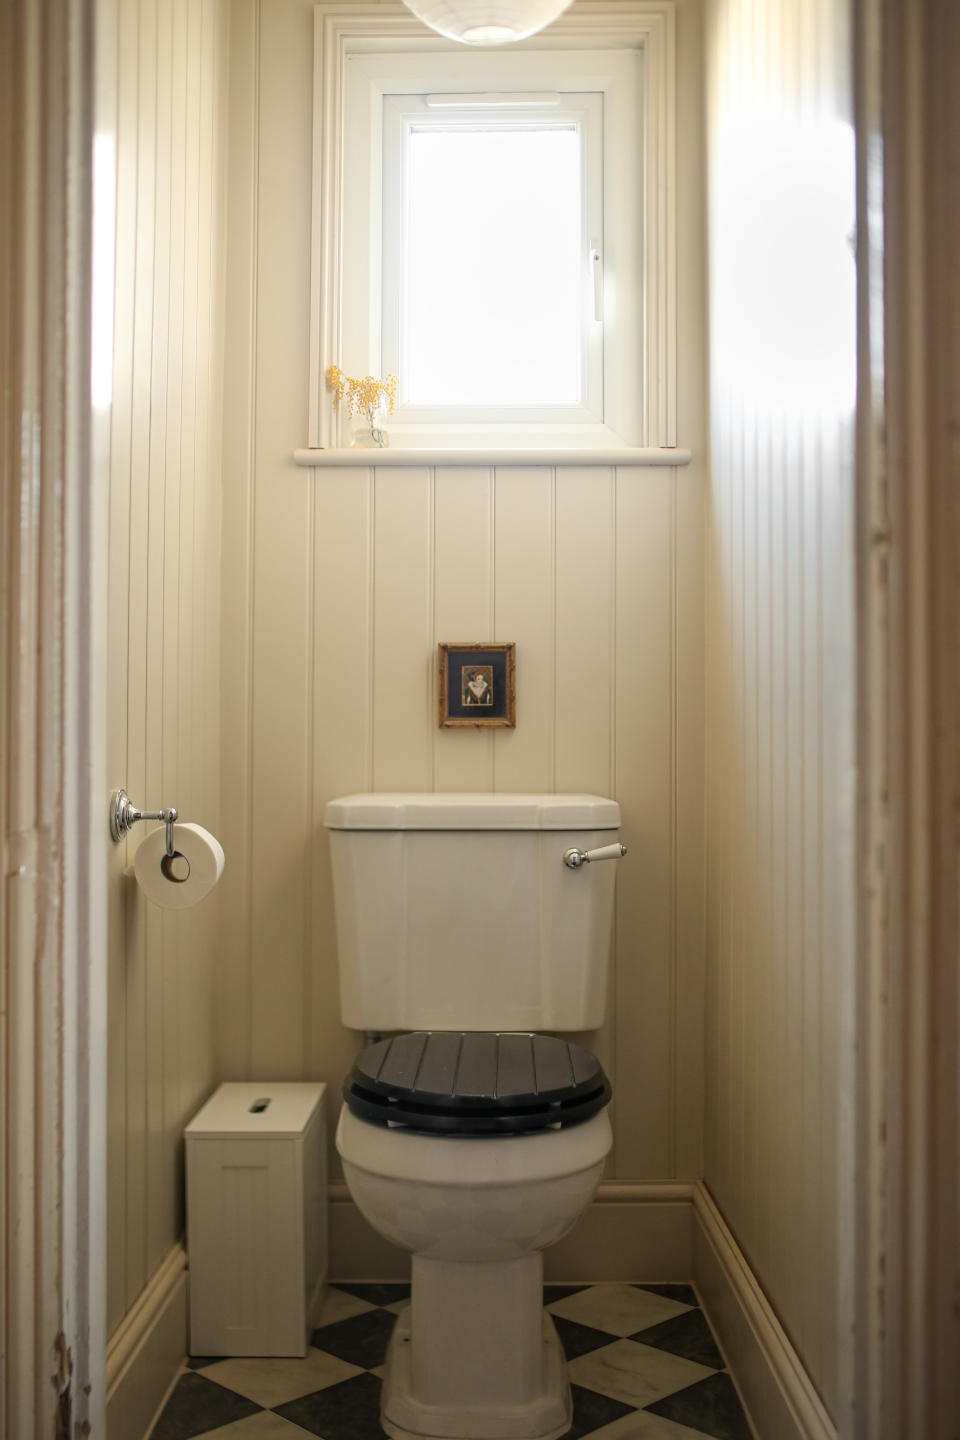 A modern bathroom with a cream wood panelled walls and toilet with wooden toilet seat